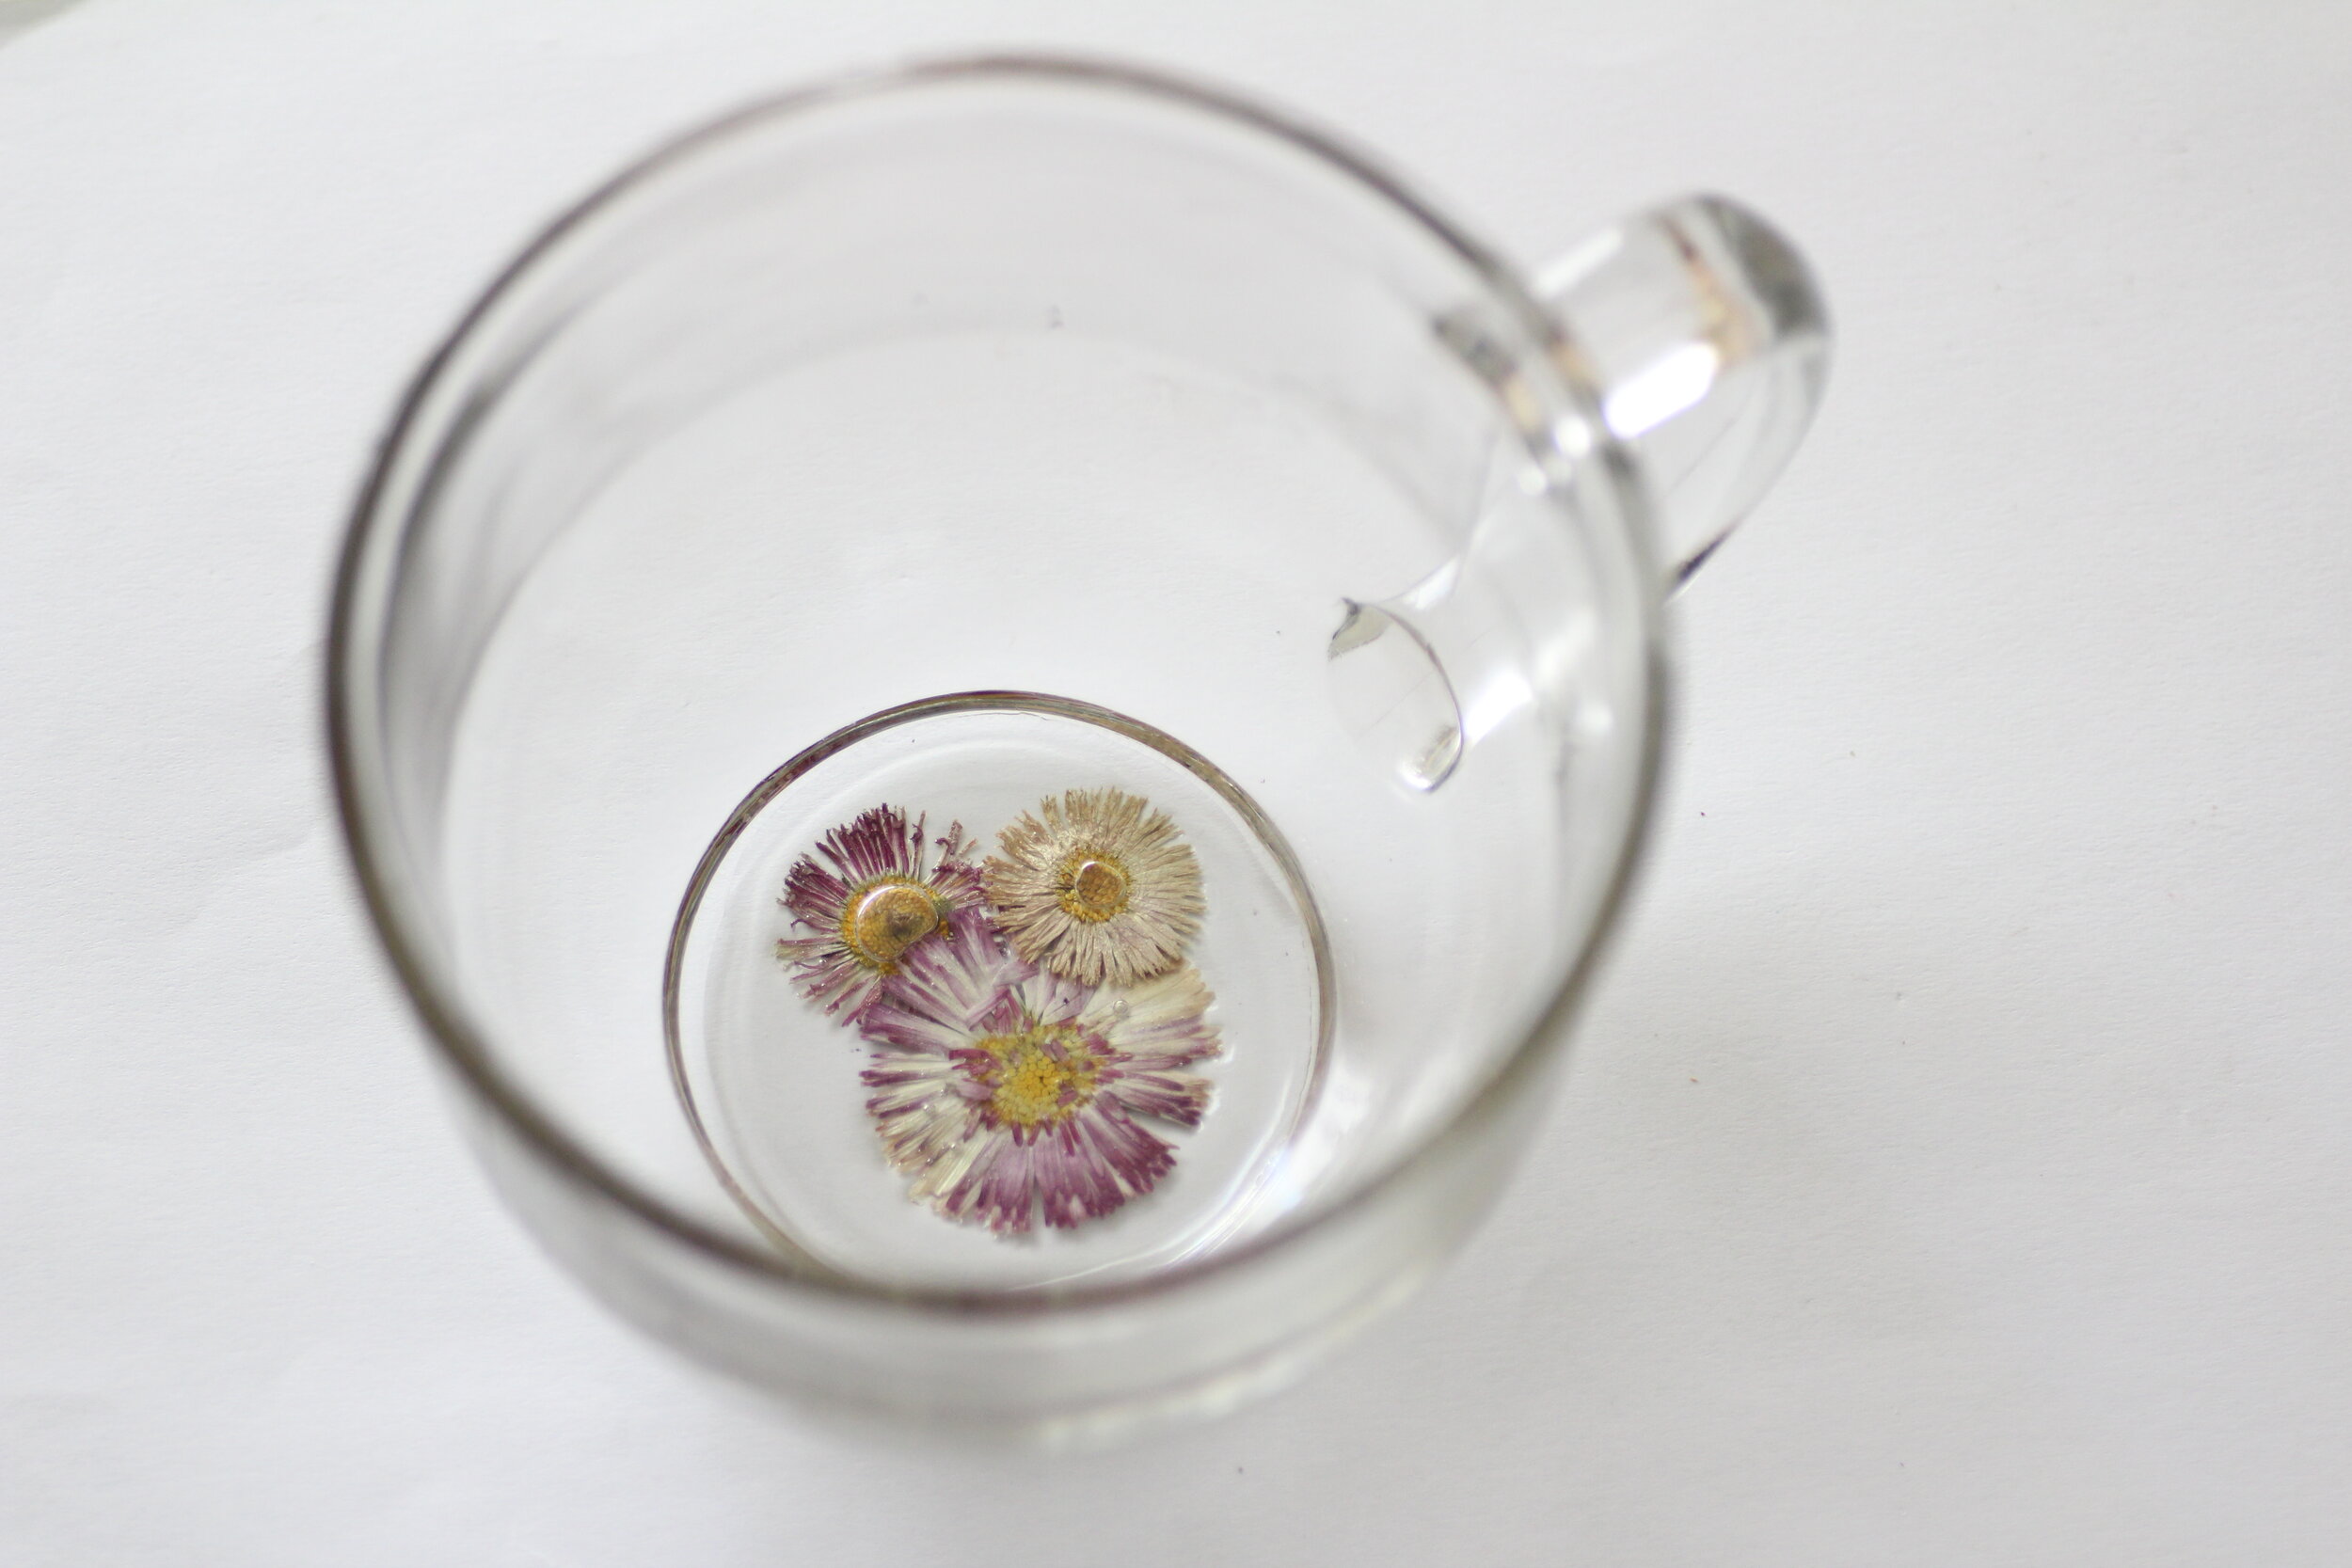 Flower resin tea cups — those lovely roots